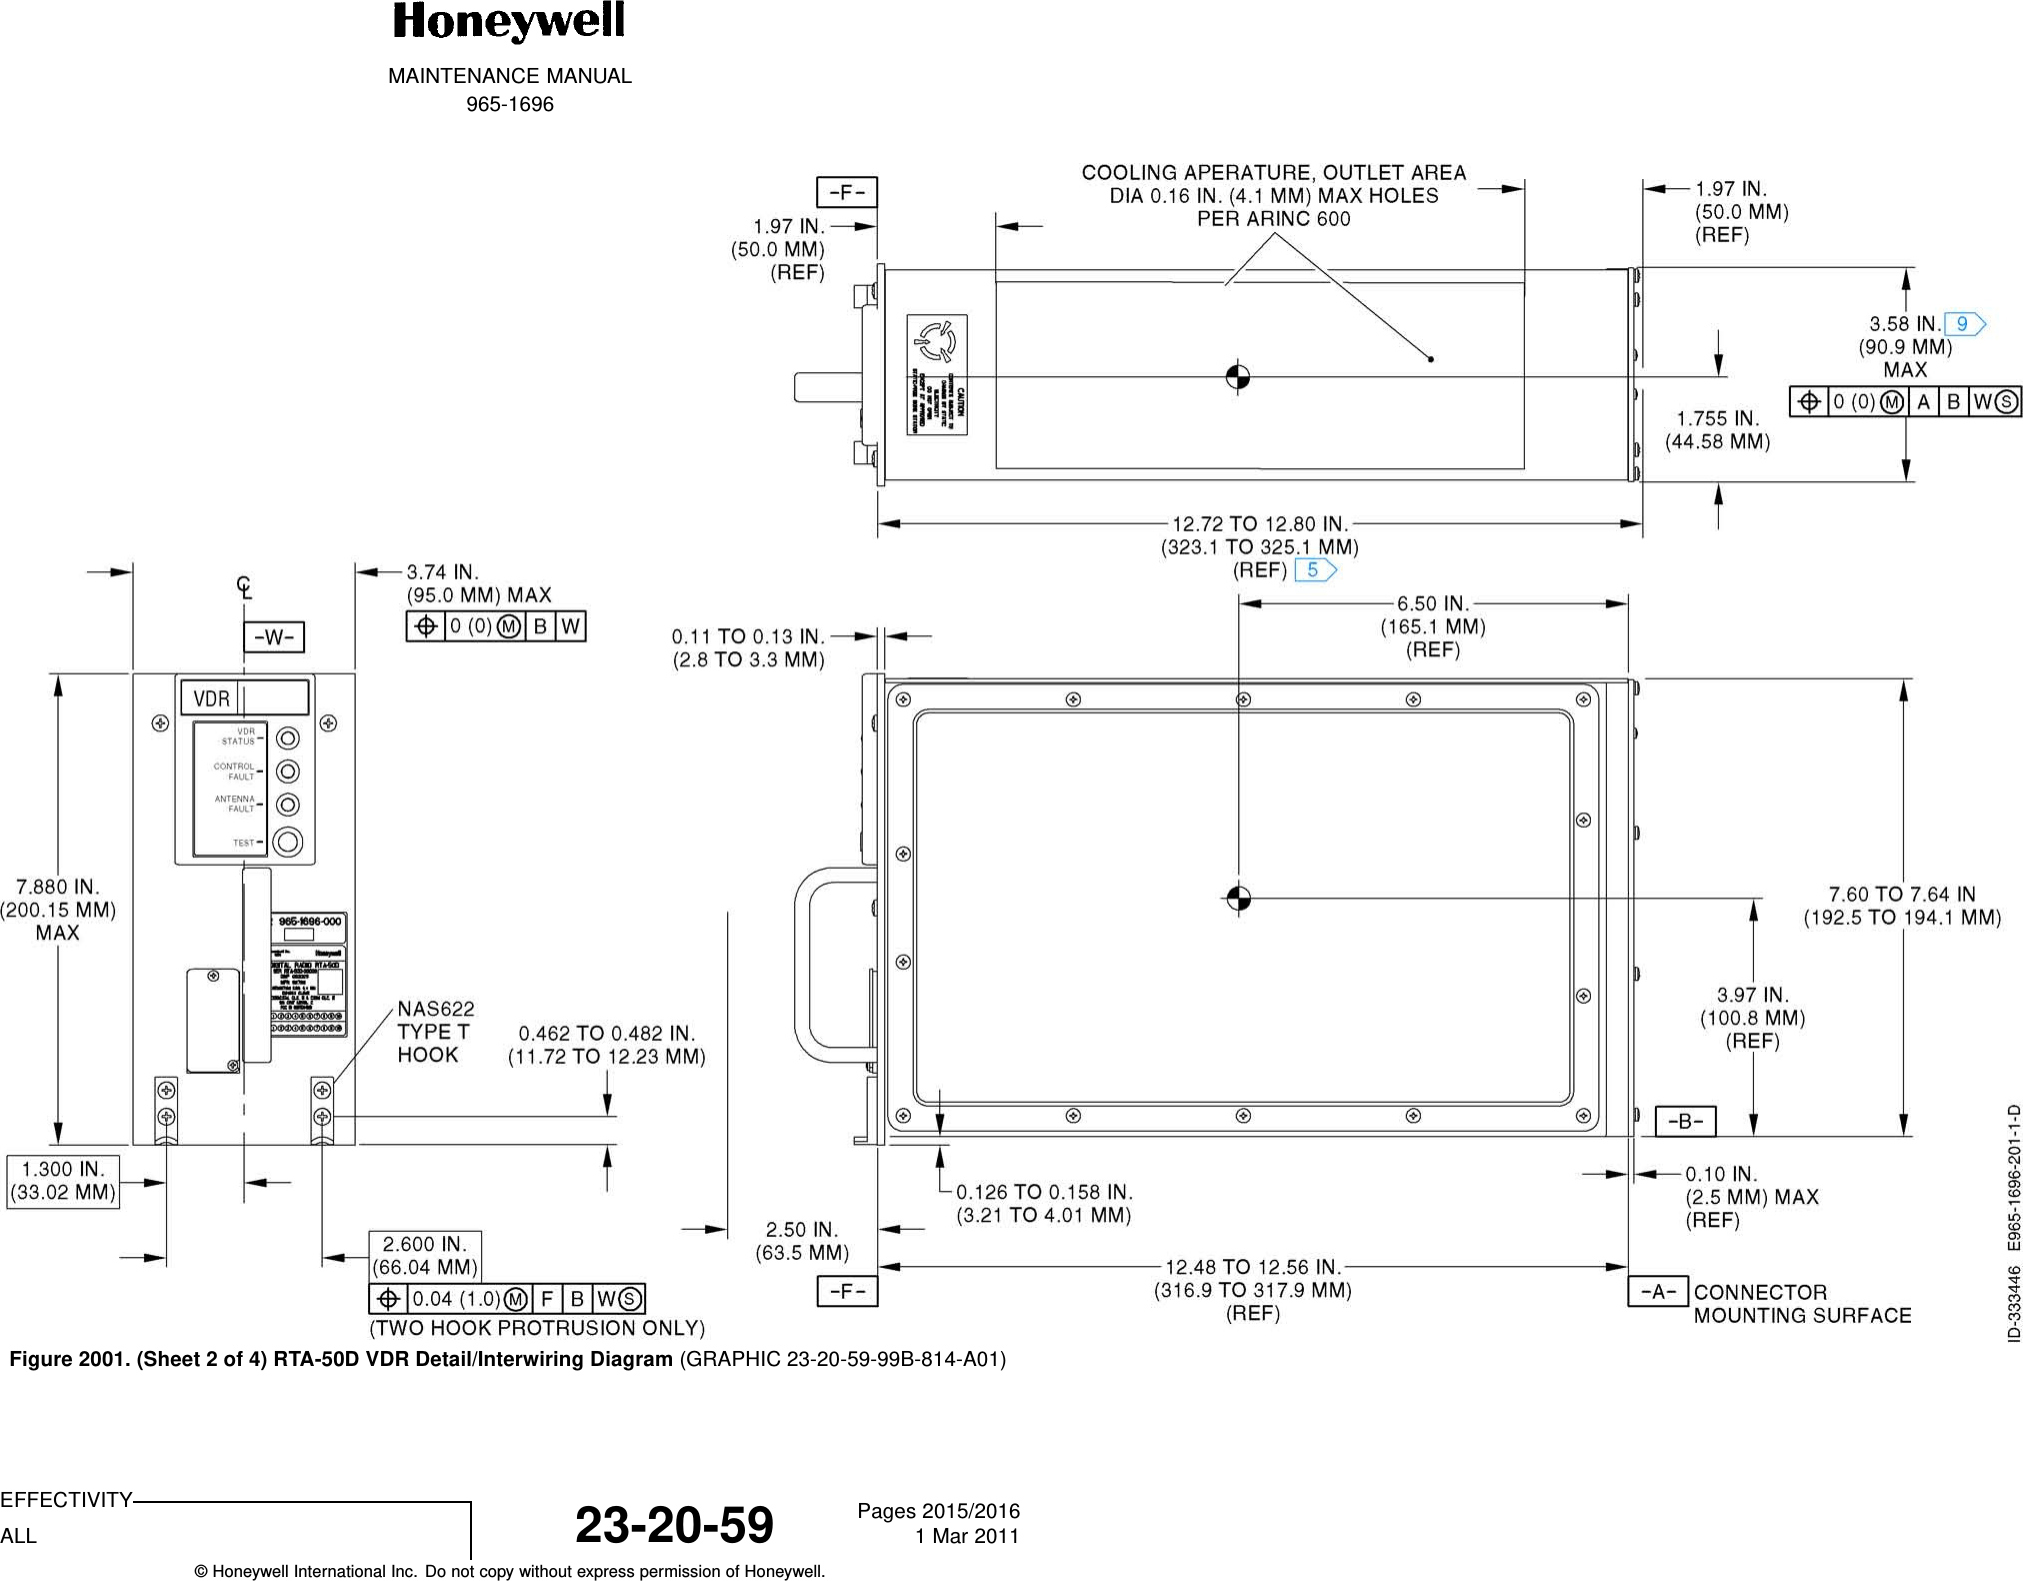 MAINTENANCE MANUAL965-1696Figure 2001. (Sheet 2 of 4) RTA-50D VDR Detail/Interwiring Diagram (GRAPHIC 23-20-59-99B-814-A01)EFFECTIVITYALL 23-20-59 Pages 2015/20161 Mar 2011© Honeywell International Inc. Do not copy without express permission of Honeywell.